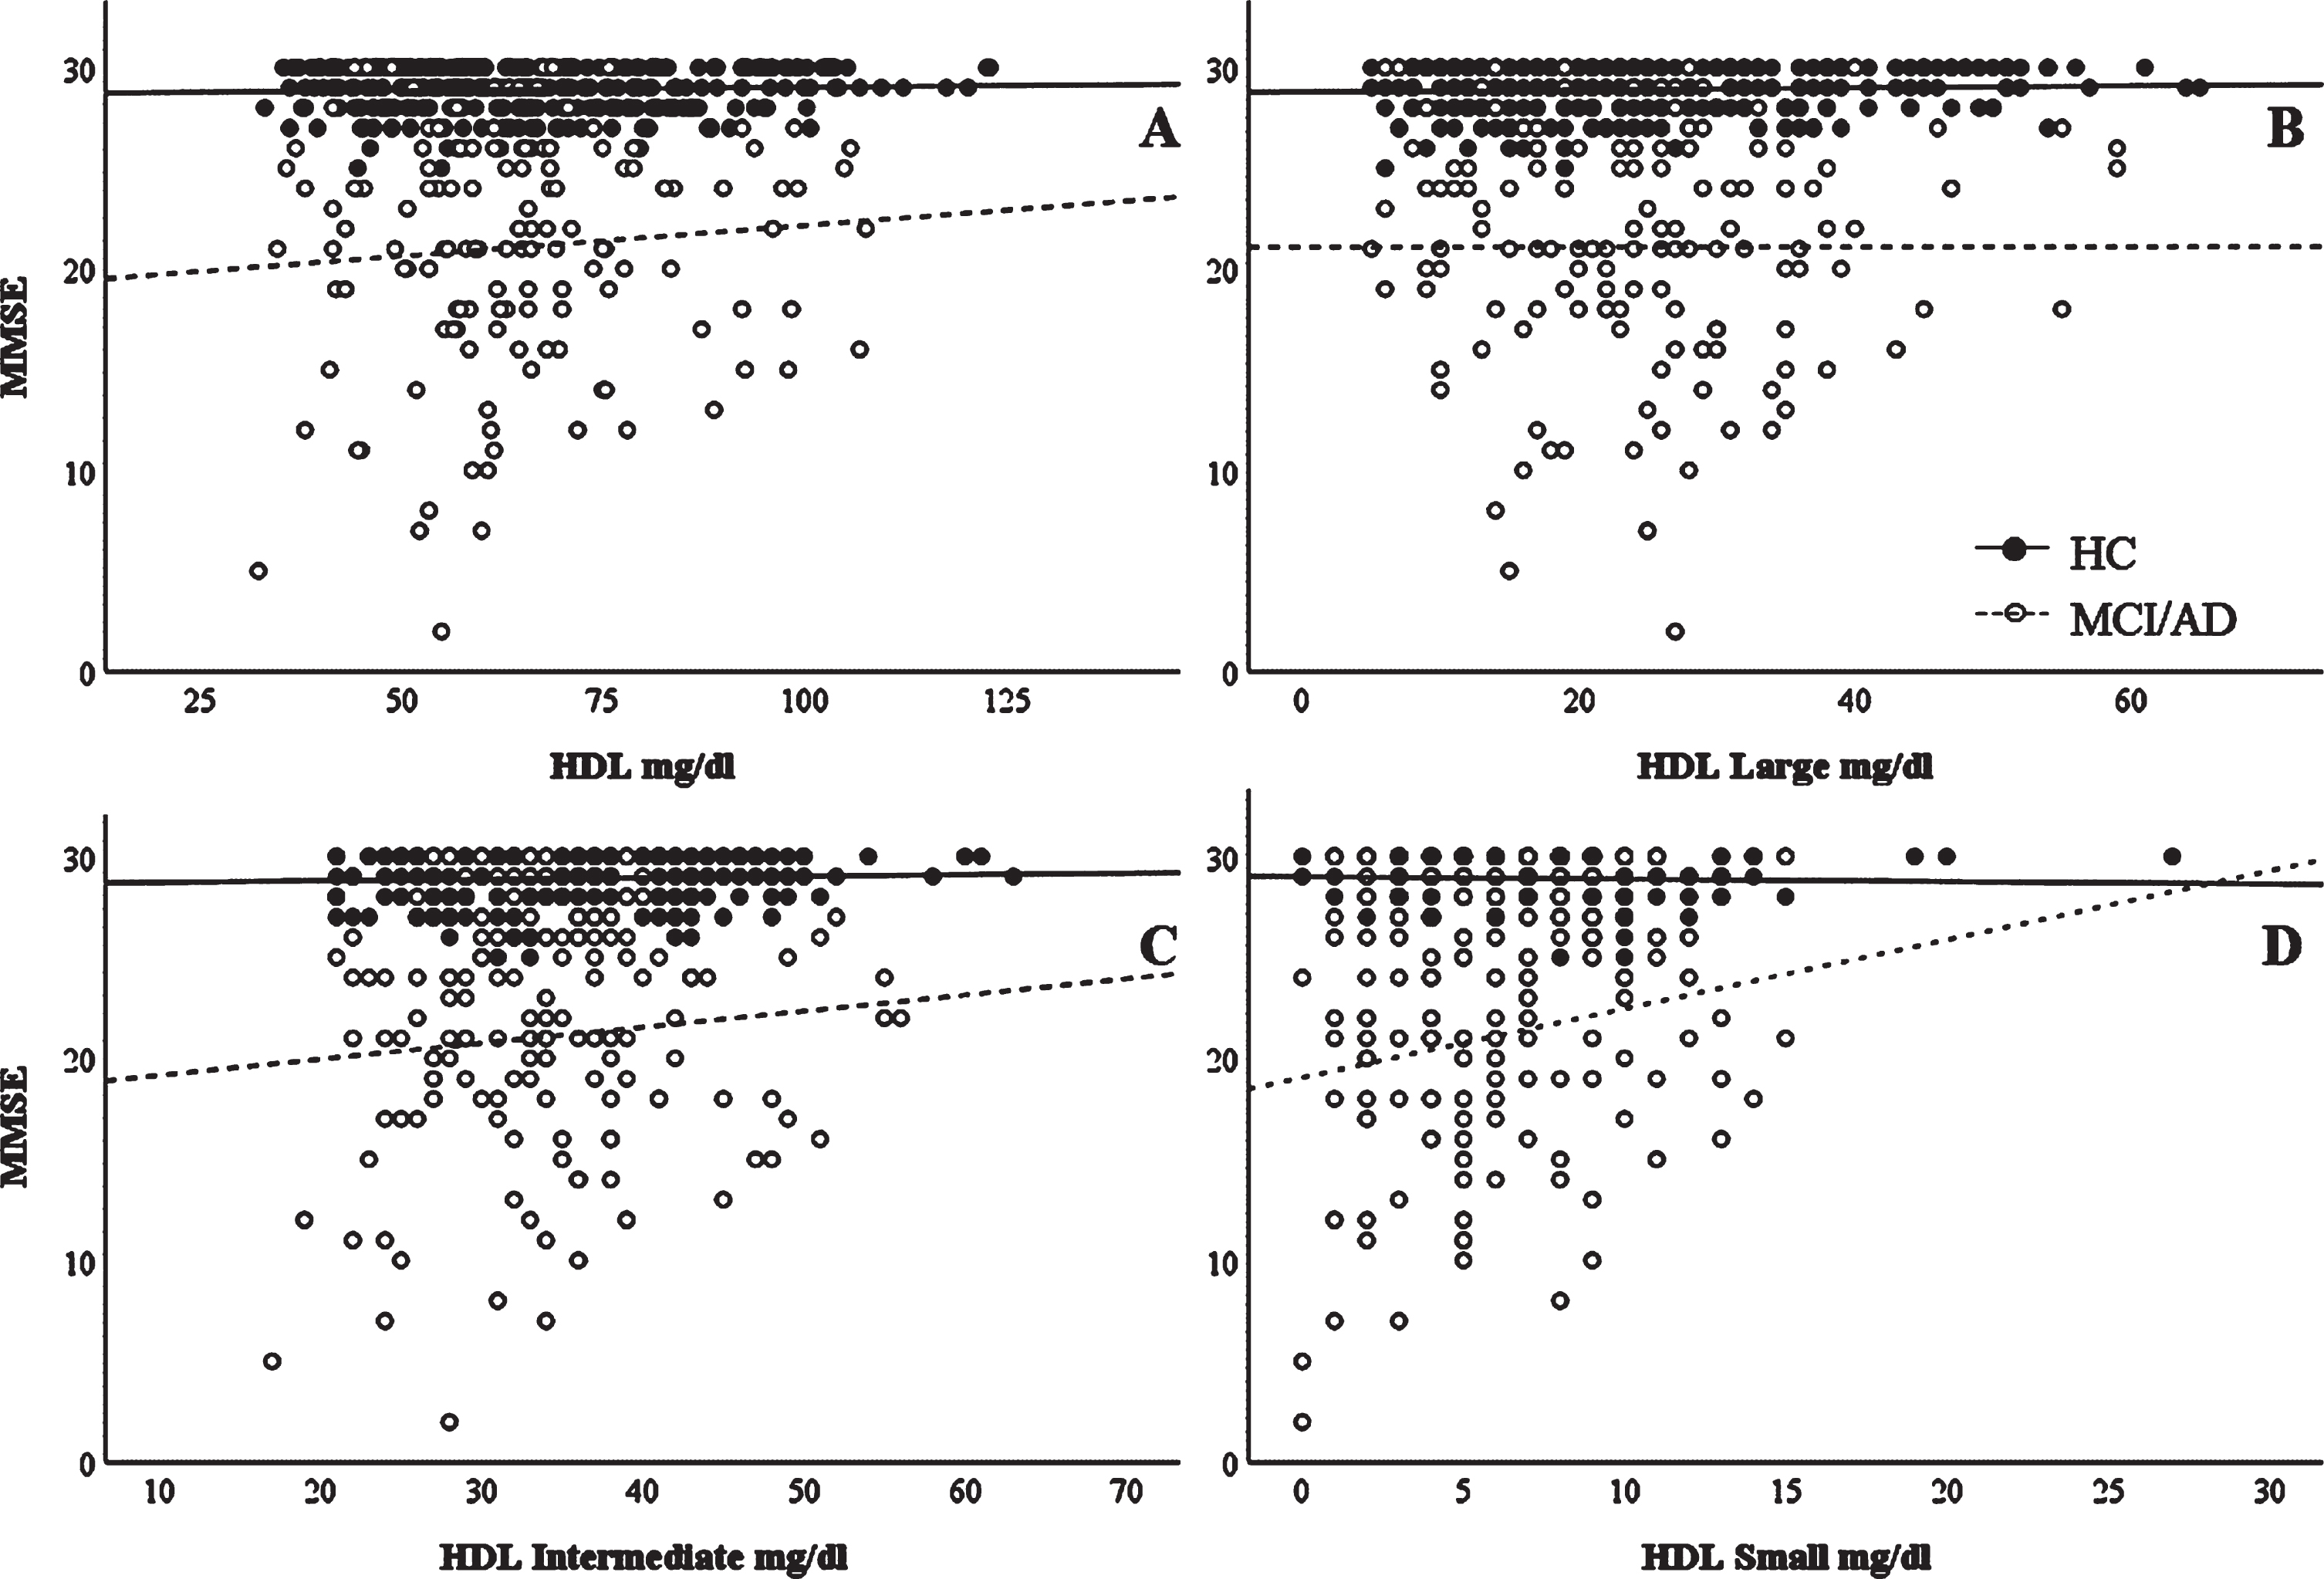 Correlations between MMSE scores and HDL subclasses. Unadjusted correlation between MMSE scores and (A) HDL, (B) HDL Large, (C) HDL Intermediate, and (D) HDL Small subclasses. Spearman’s correlation data are reported in the text.